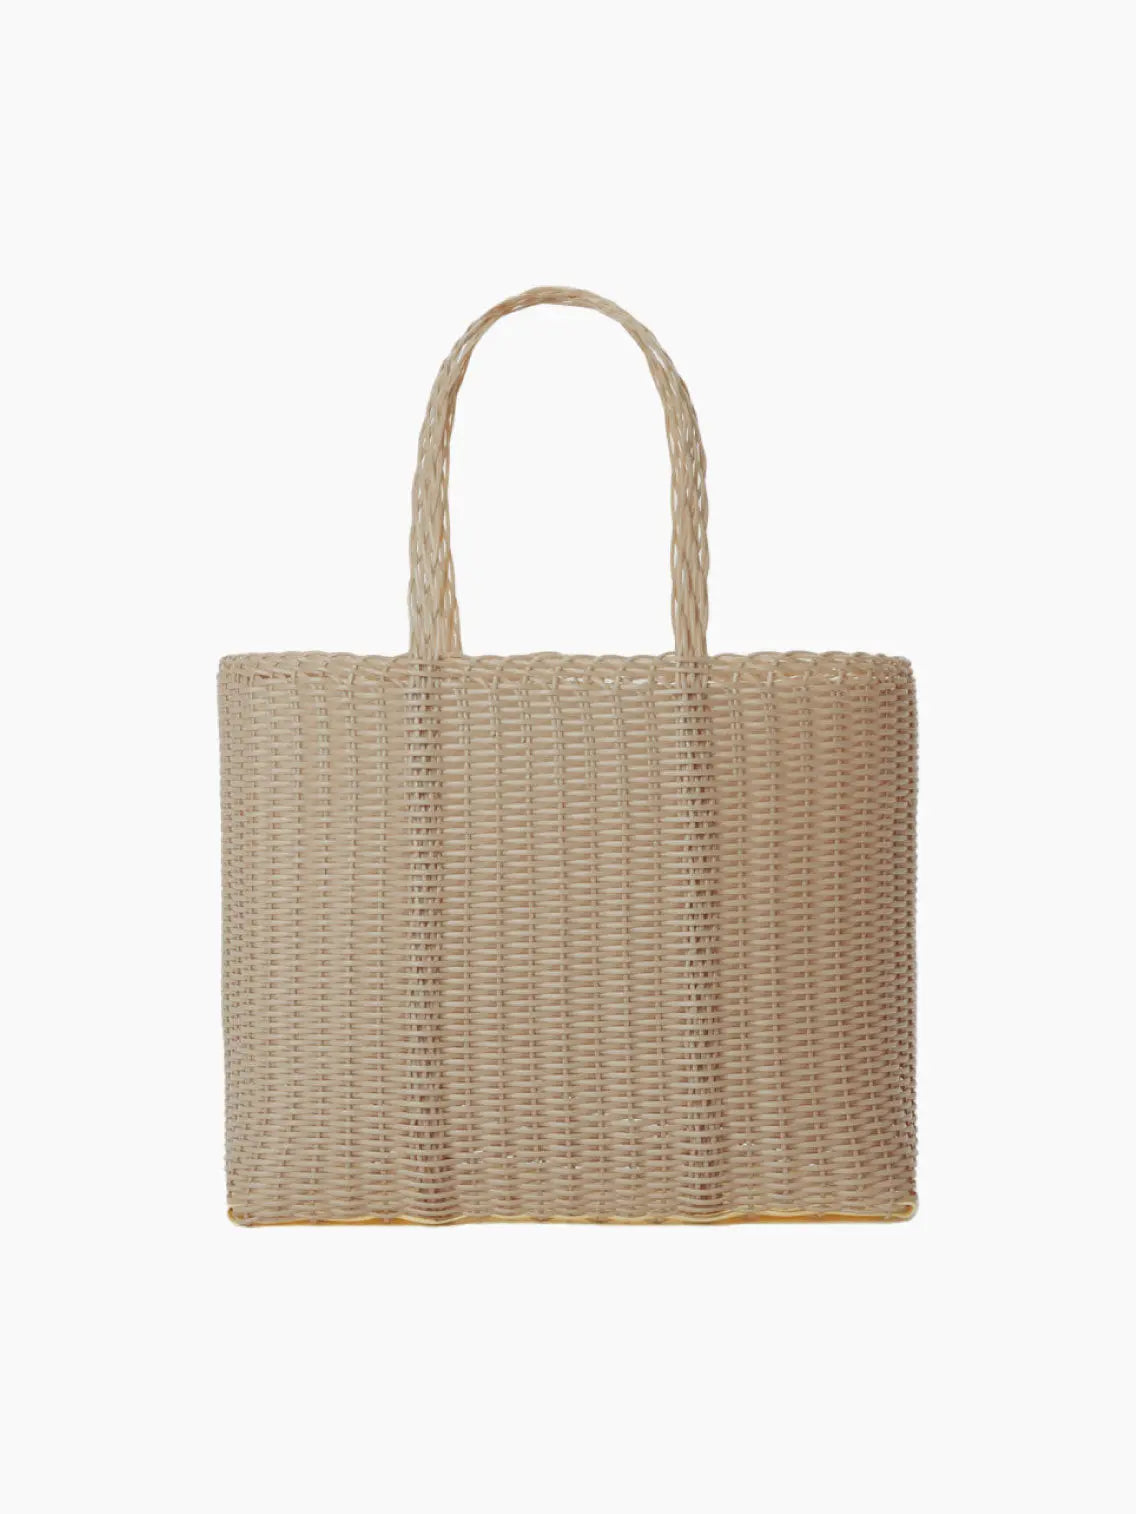 A Palorosa Flat Small Sand Bag from bassalstore, featuring two rounded handles for easy carrying. The bag has a natural, beige color and boasts a simple, minimalist design. Its uniform weaving pattern gives it a sturdy appearance. The background is plain white, enhancing its elegant look.